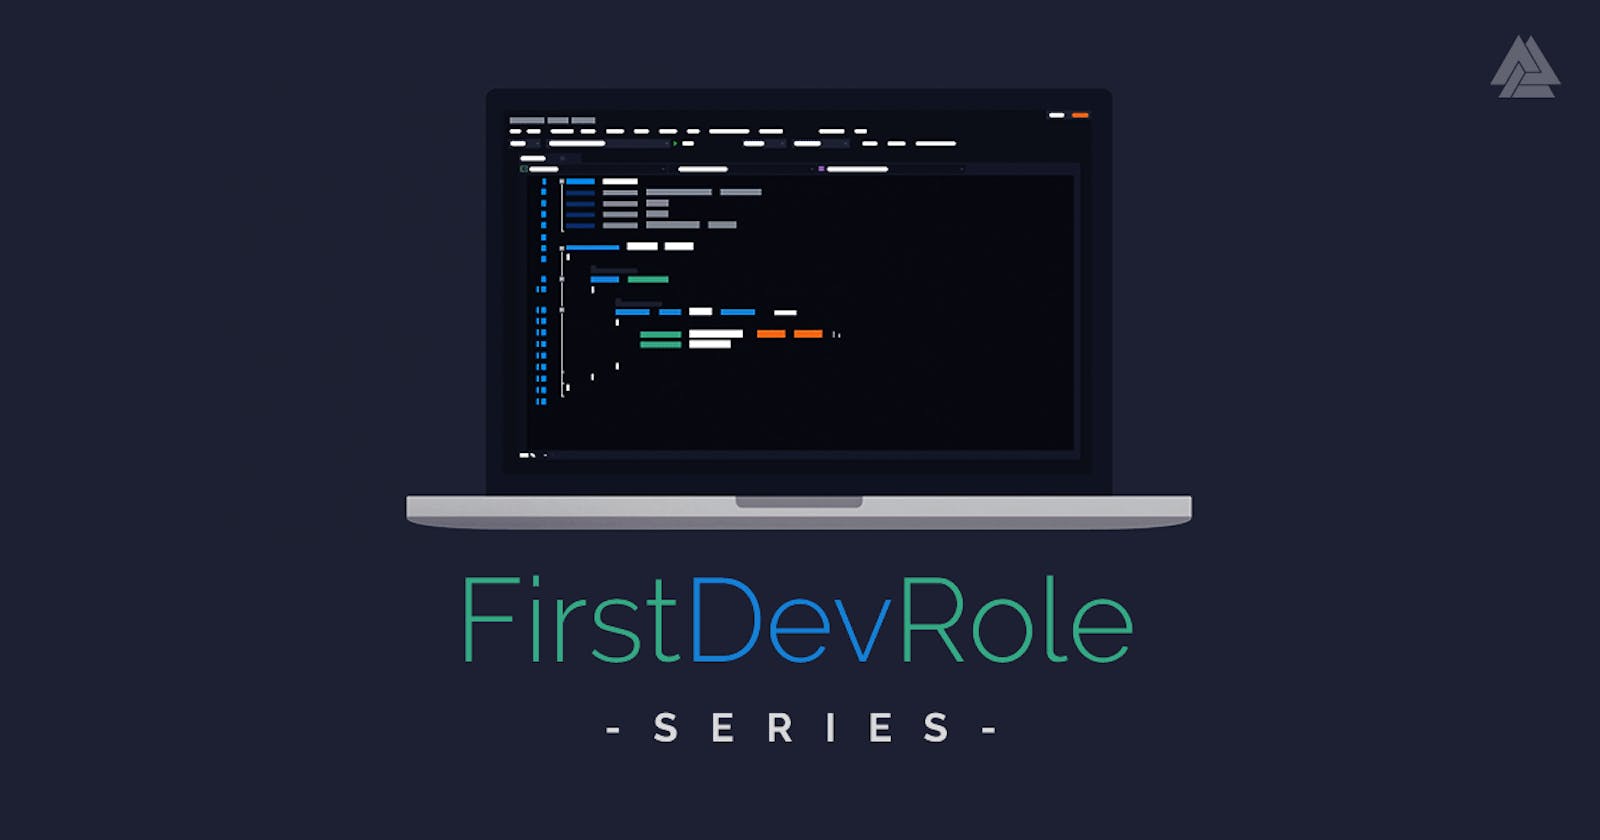 👨‍💻[FirstDevRole #3] How to Write an Effective CV/Resume for a Programmer Role if You Have No Work Experience